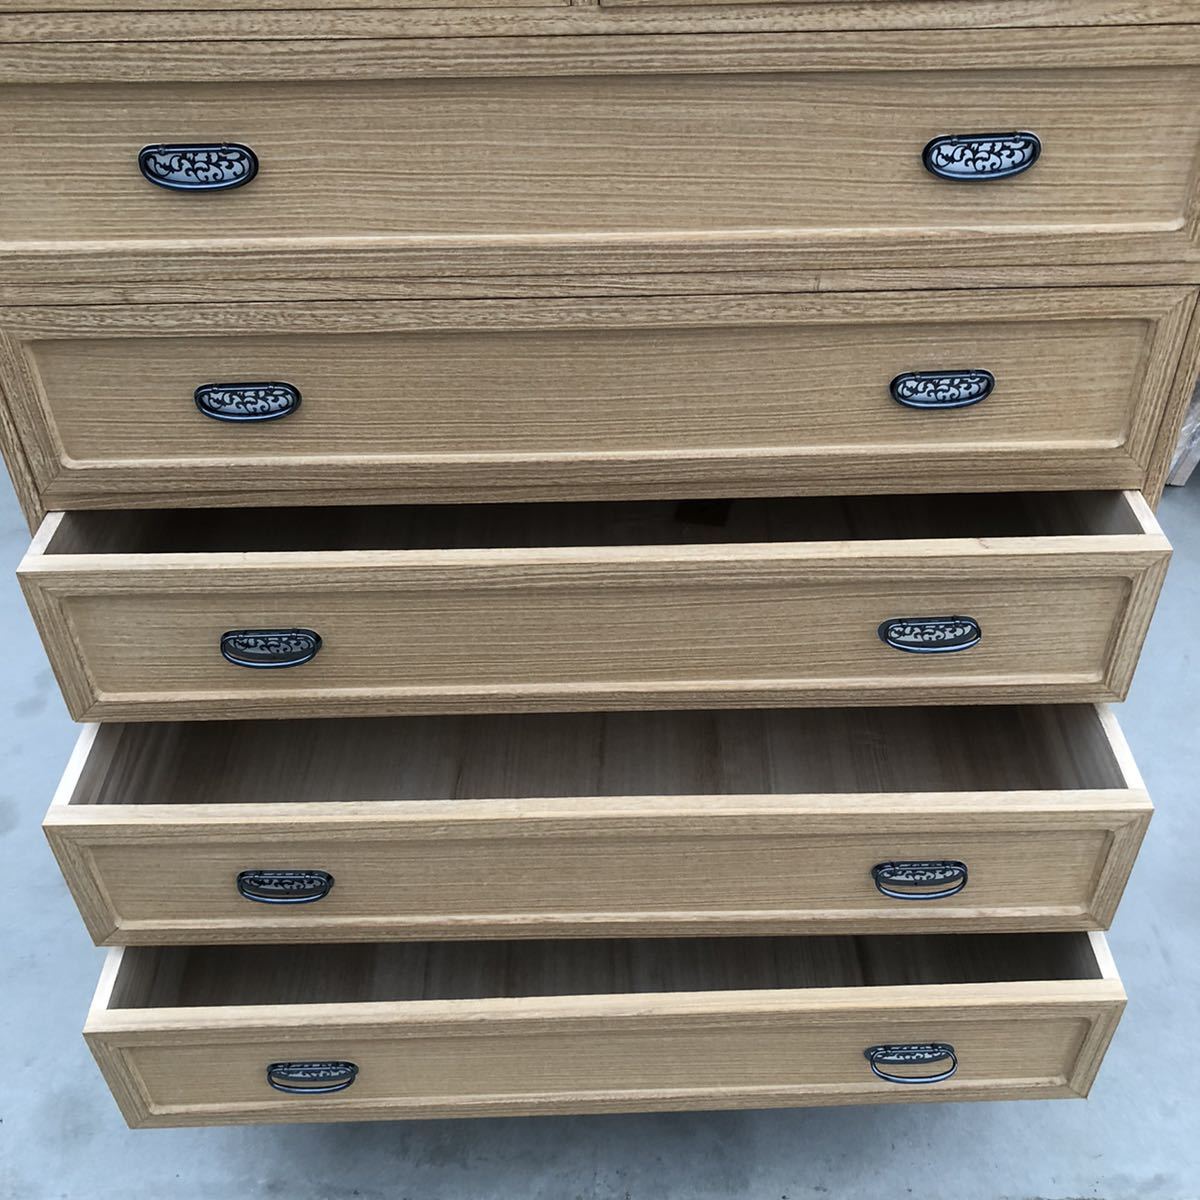  domestic production . chest of drawers total . Dance 6 number width 103cm× depth 43cm× height 128cm 6 step 2 cup peace furniture peace chest of drawers . chest of drawers 6 step household goods flight D rank 